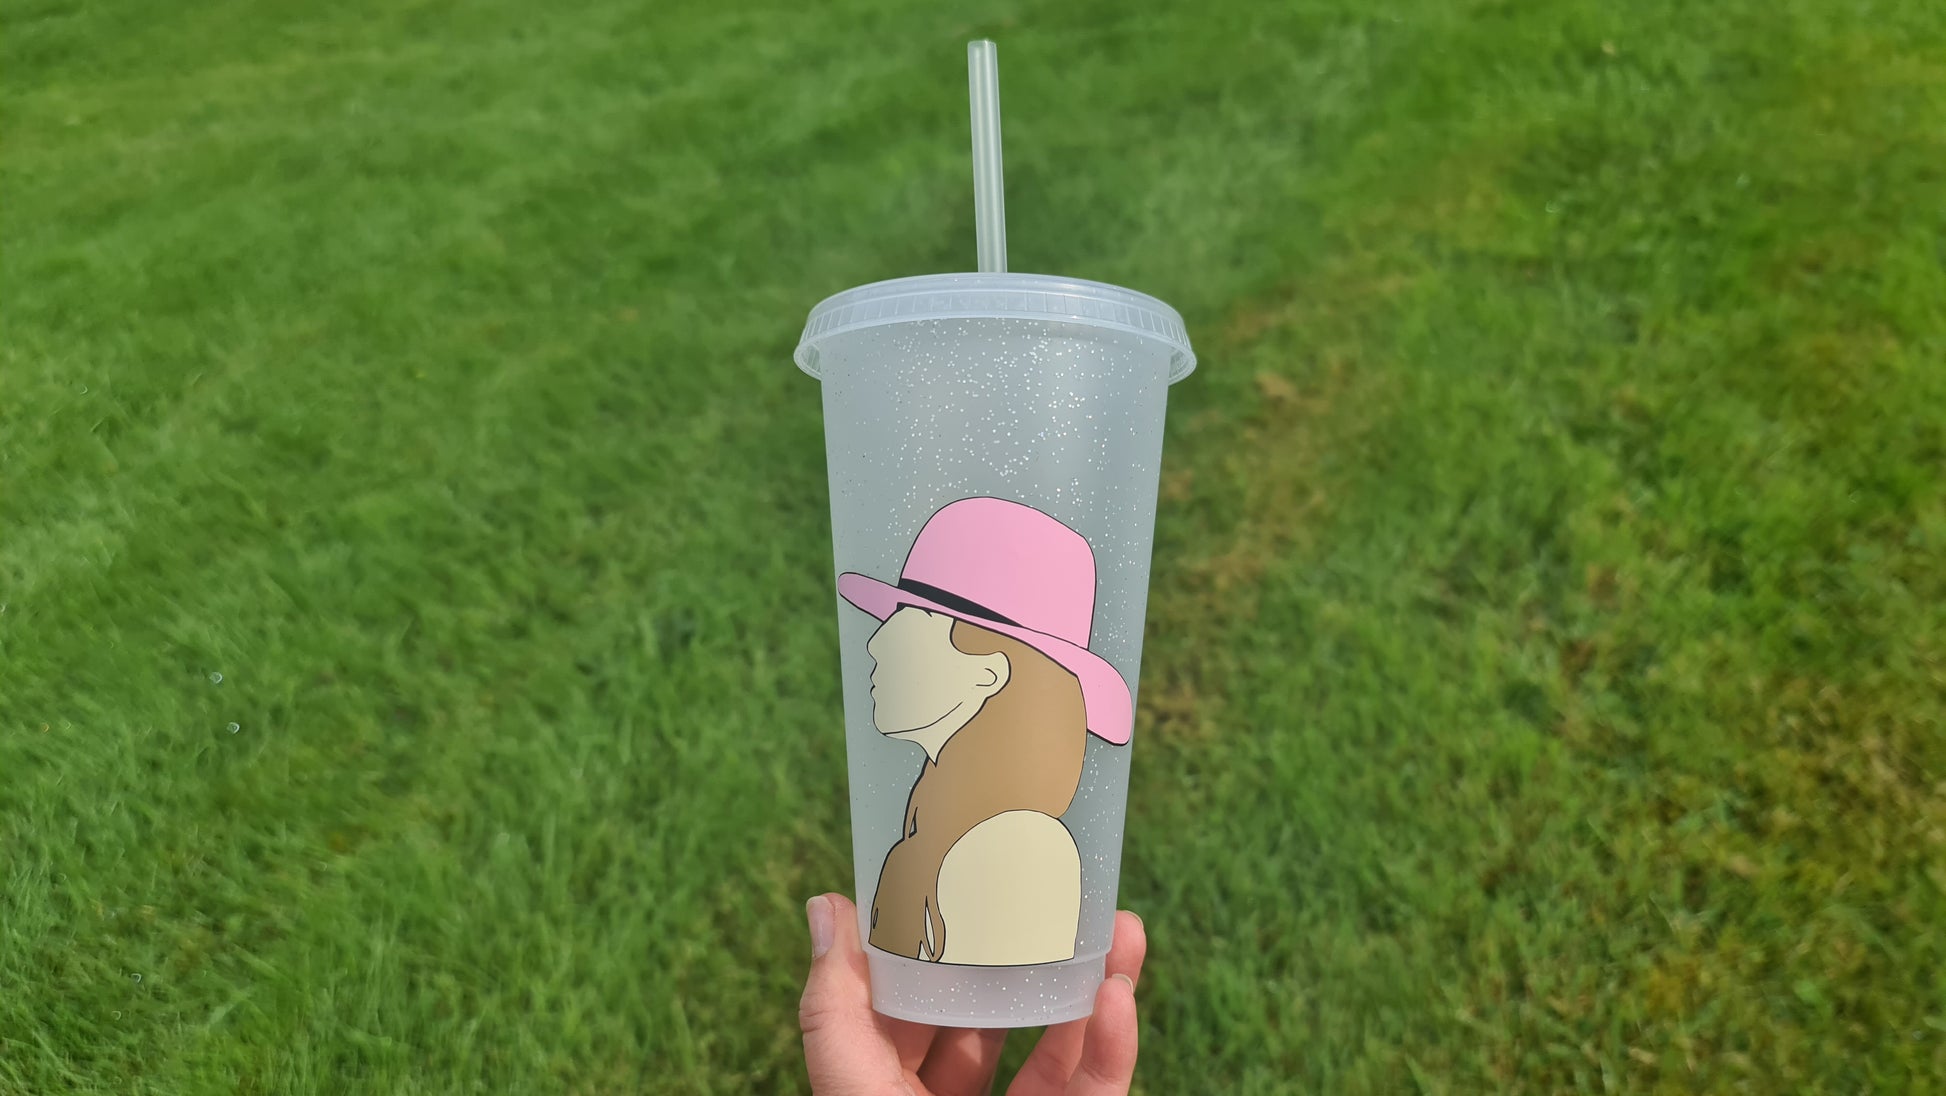 Lady Gaga 24oz Cups / Starbucks Custom Tumbler / Personalised Music Fan Merch Concert Tickets / Reusable Straw and Lid